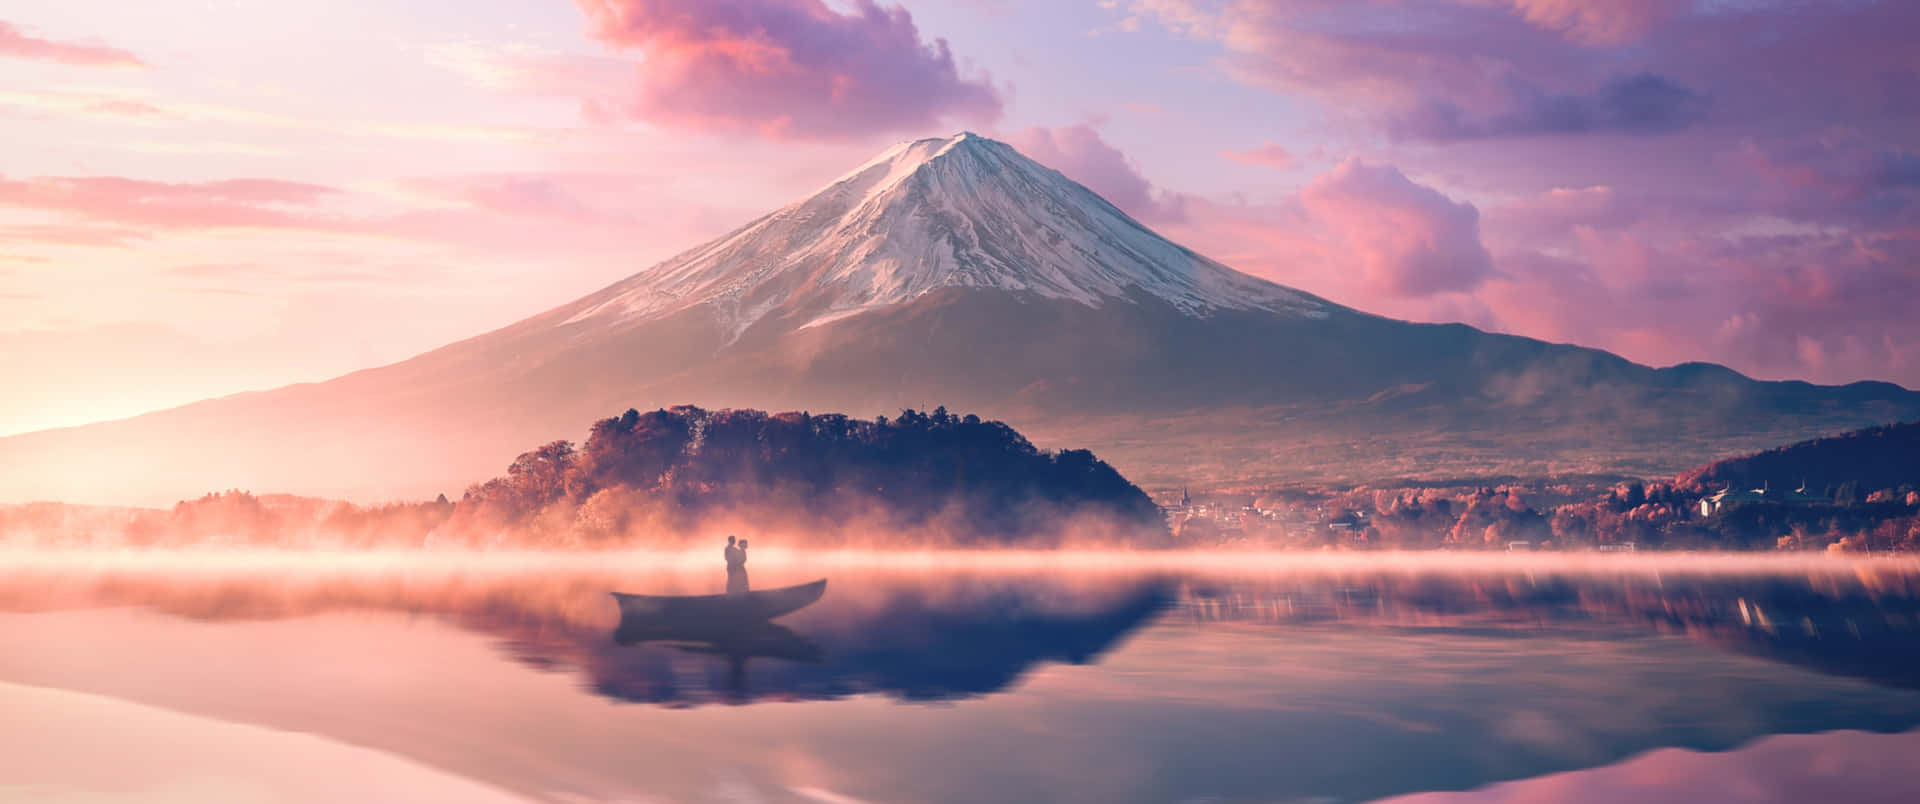 Lovers On Boat With Mount Fuji Wallpaper